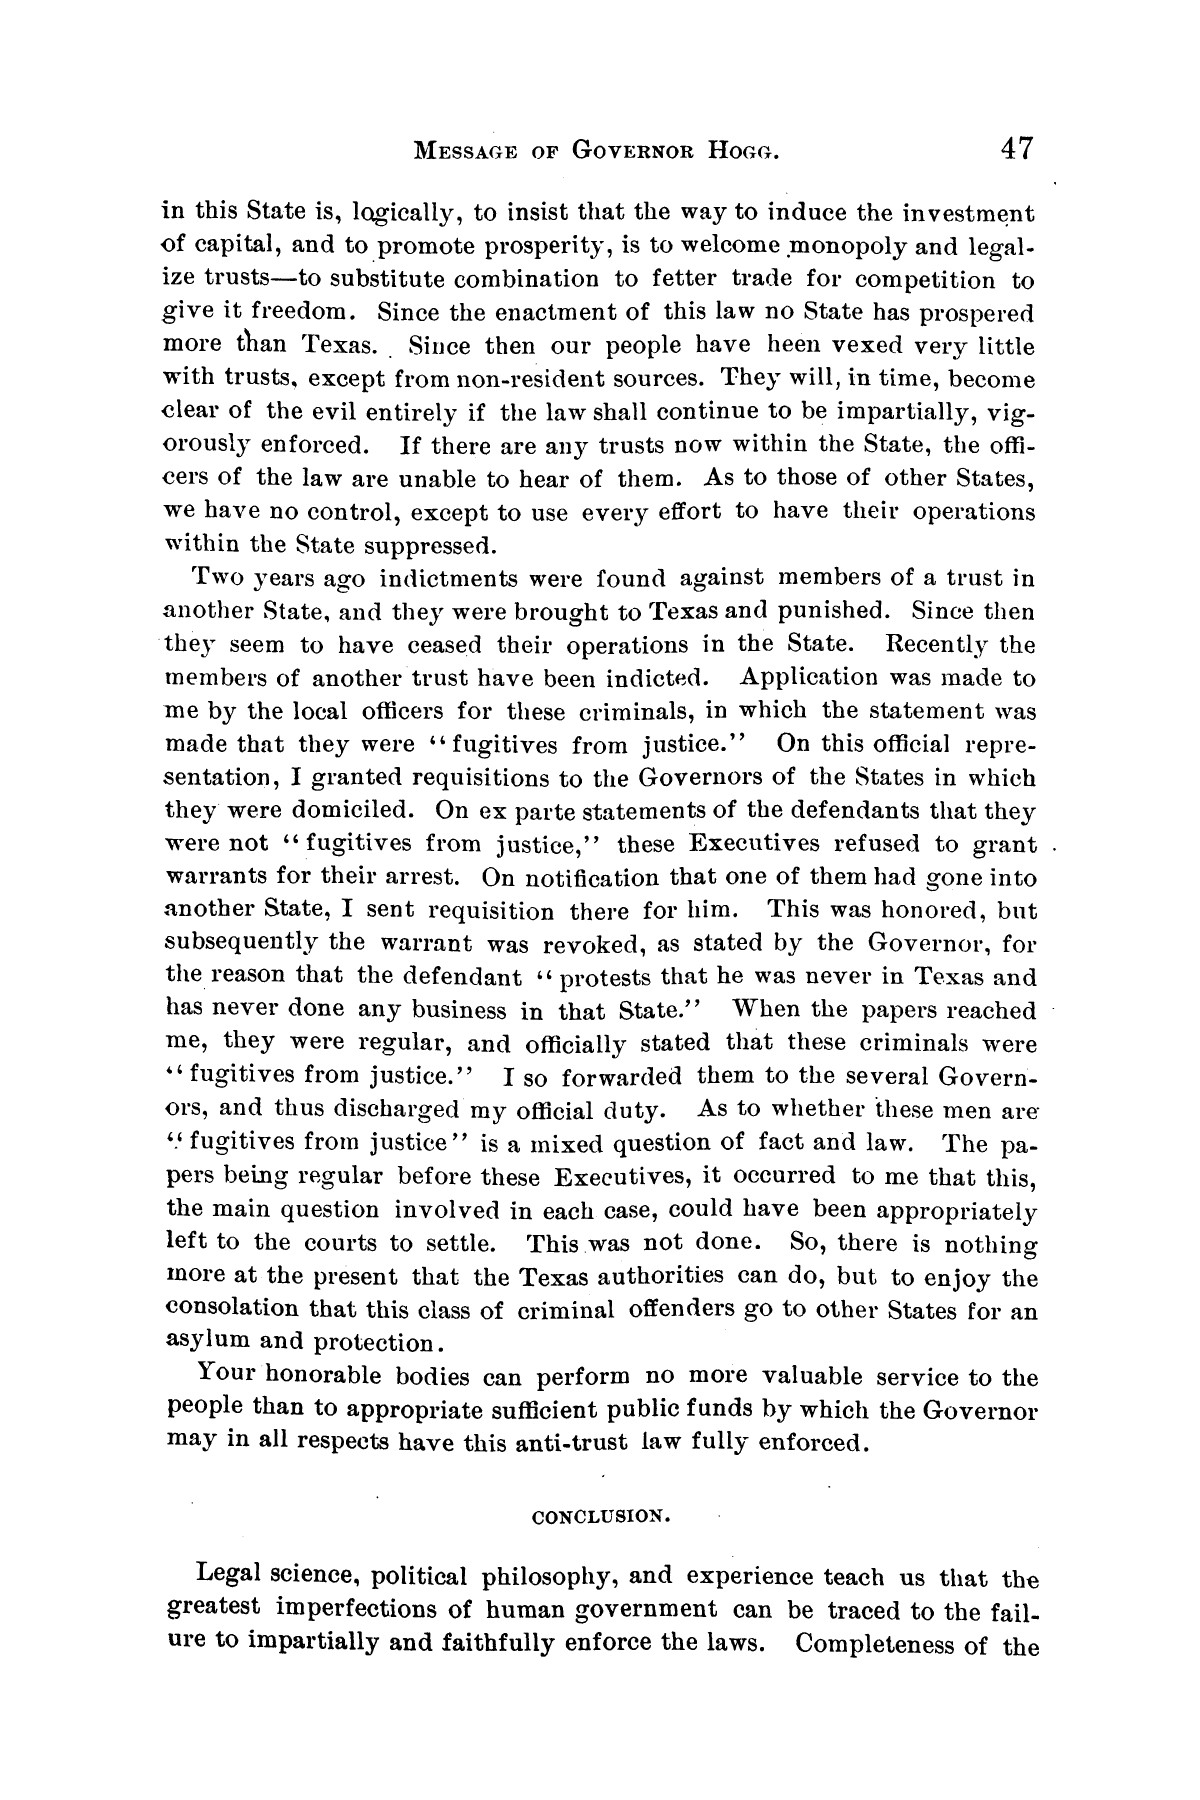 Message of Governor James S. Hogg to the twenty-fourth legislature of Texas
                                                
                                                    [Sequence #]: 47 of 48
                                                